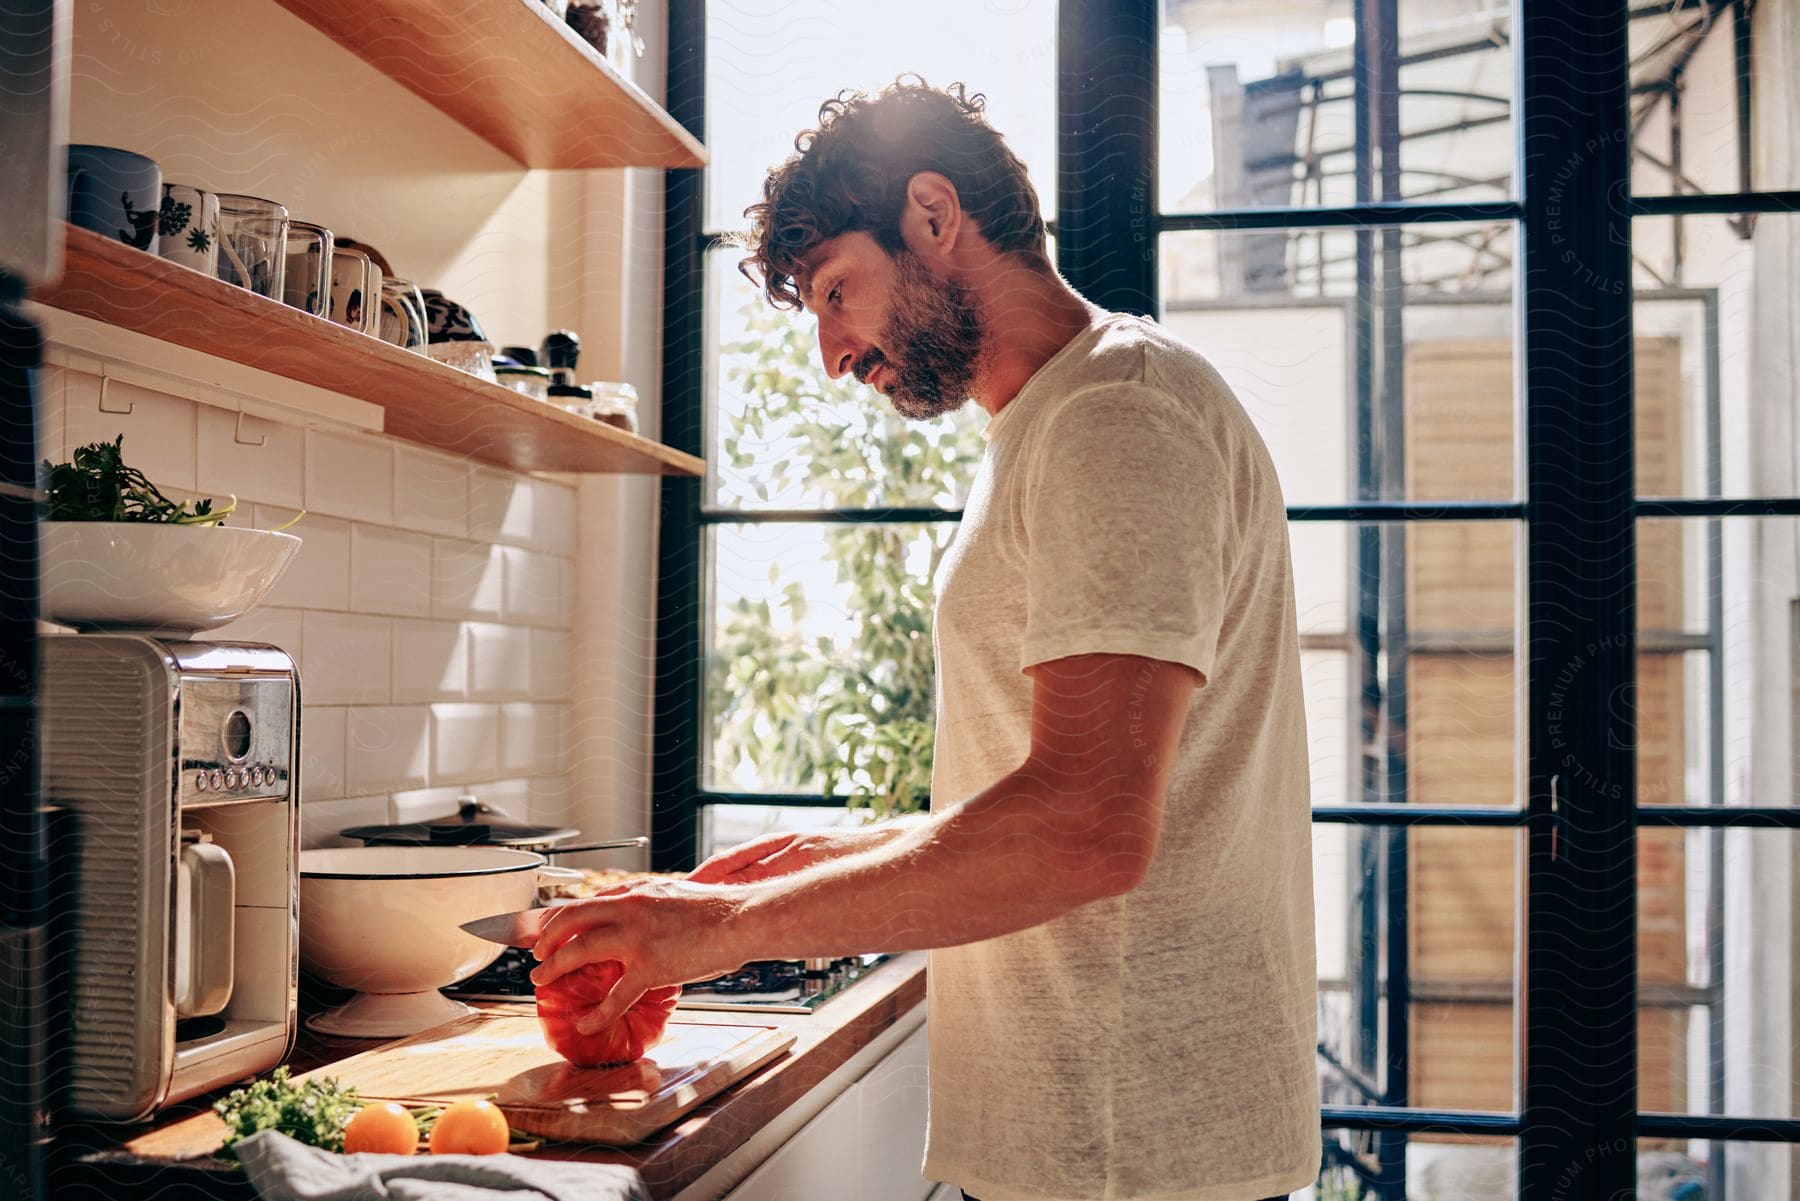 A man in a white shirt prepares food on a kitchen counter with a window view, next to a table of fresh vegetables.